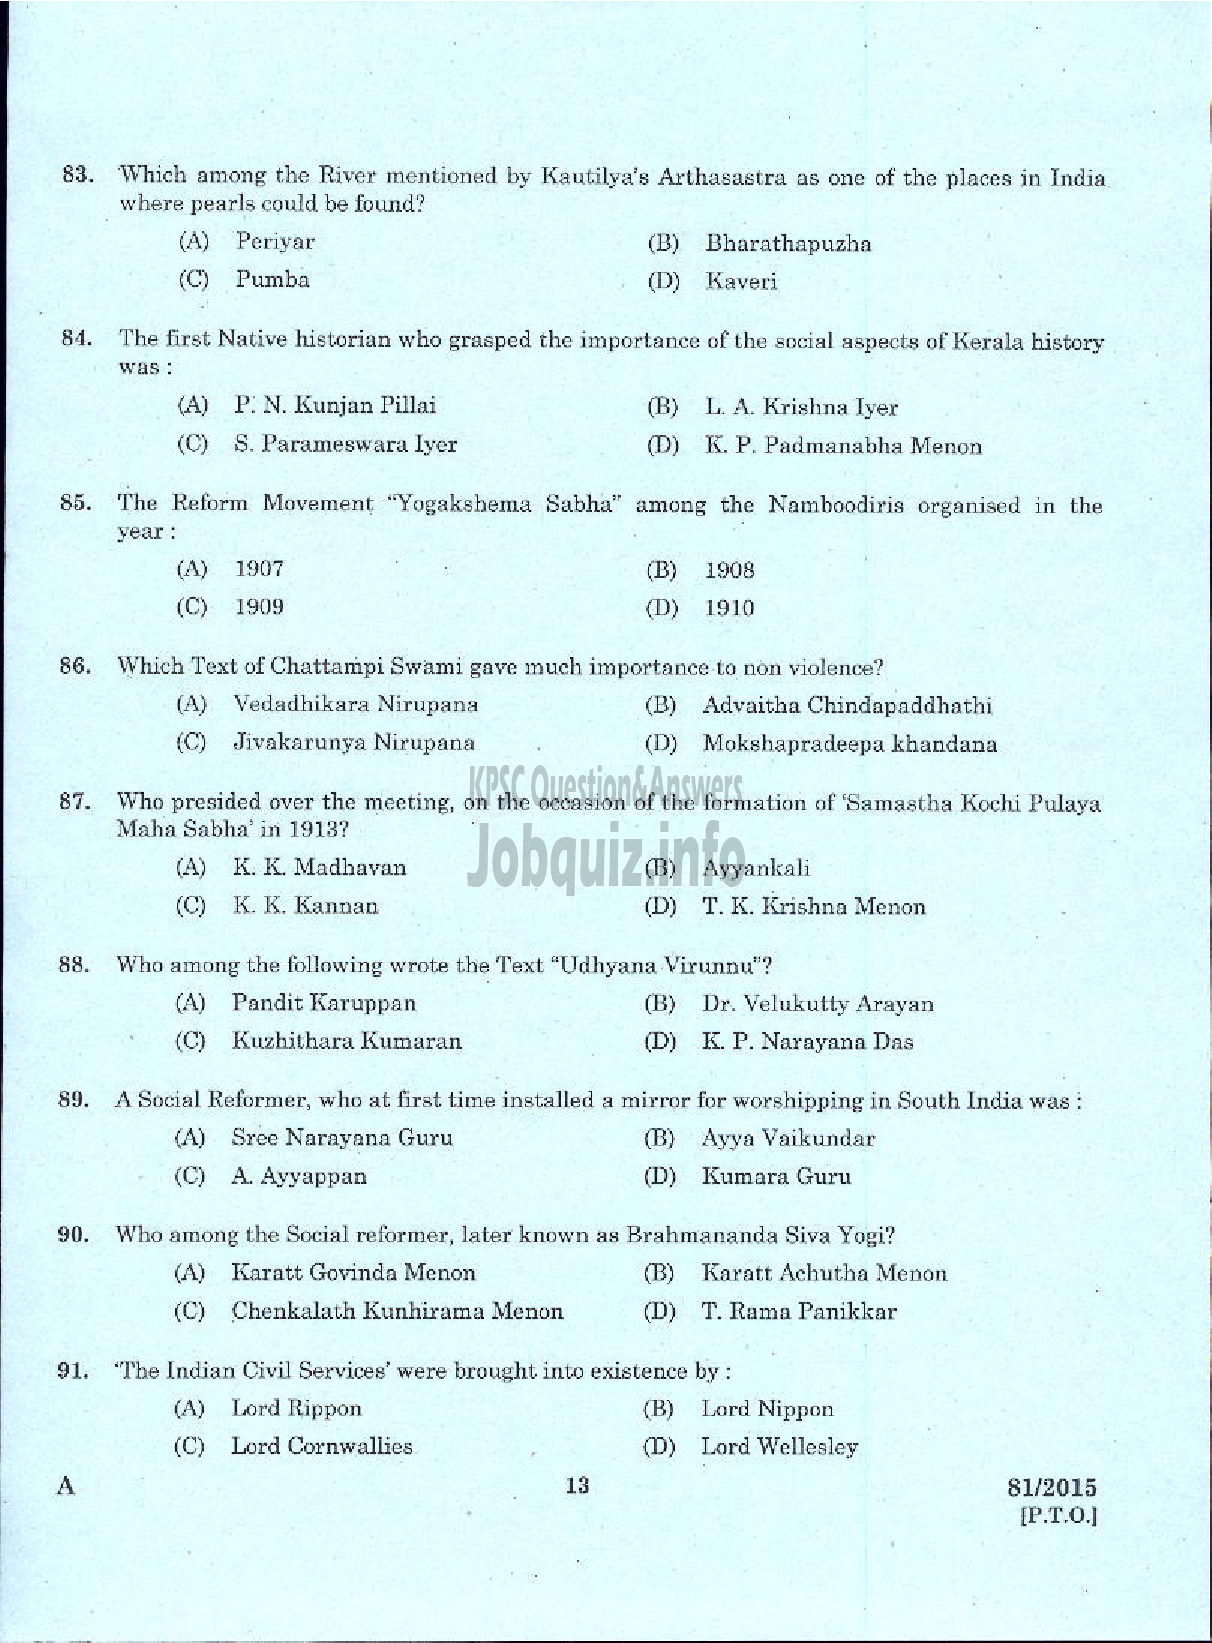 Kerala PSC Question Paper - ASSISTANT SURGEON CASUALITY MEDICAL OFFICER HEALTH SERVICES MEDICAL OFFICER KERALA FACTORIES ANS BOILERS SERVICE ASSISTANT INSURANCE MEDICAL OFFICER IMS-11